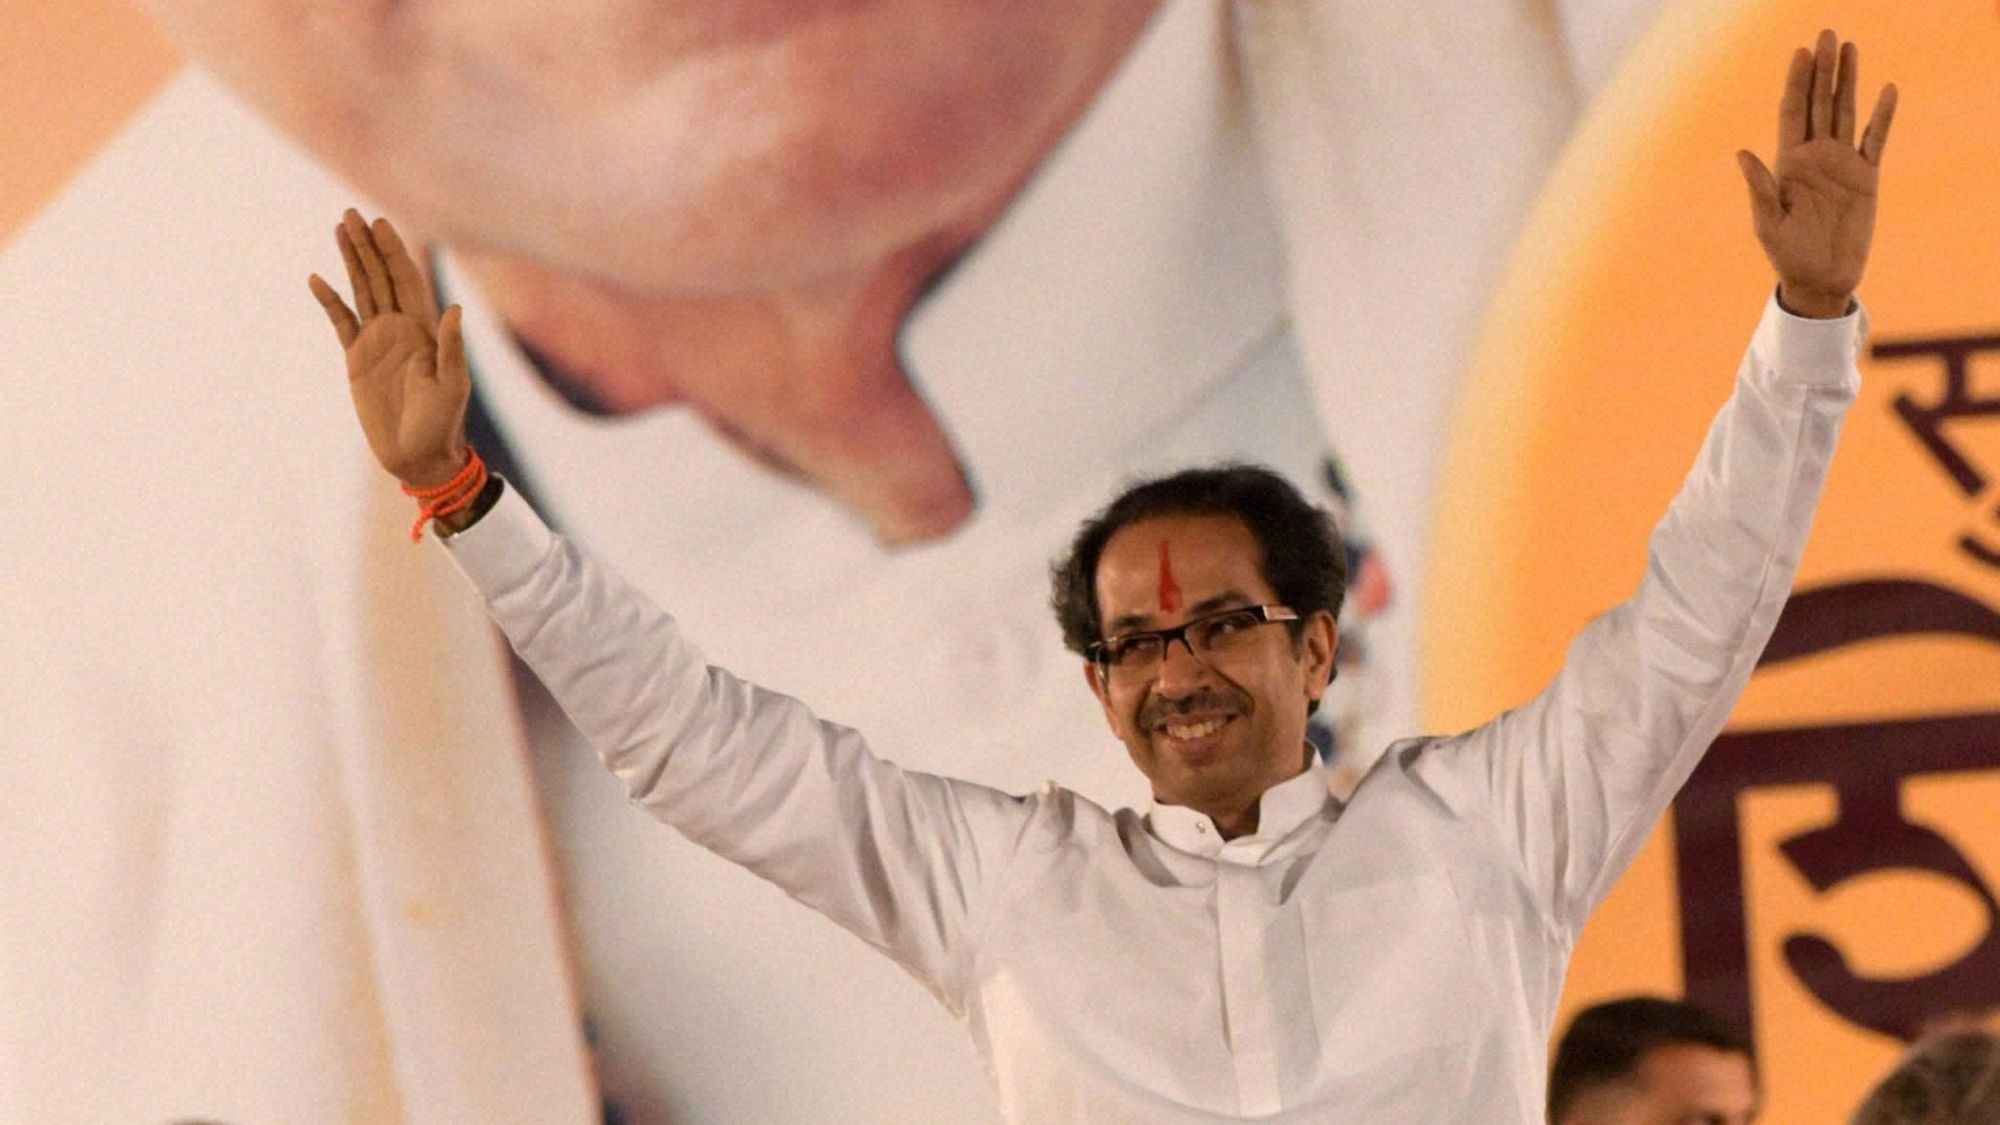 Shiv Sena chief Uddhav Thackeray has warned that the proposed Metro 3 Car shed at Aarey could end up like the aborted Nanar refinery in the Konkan region.